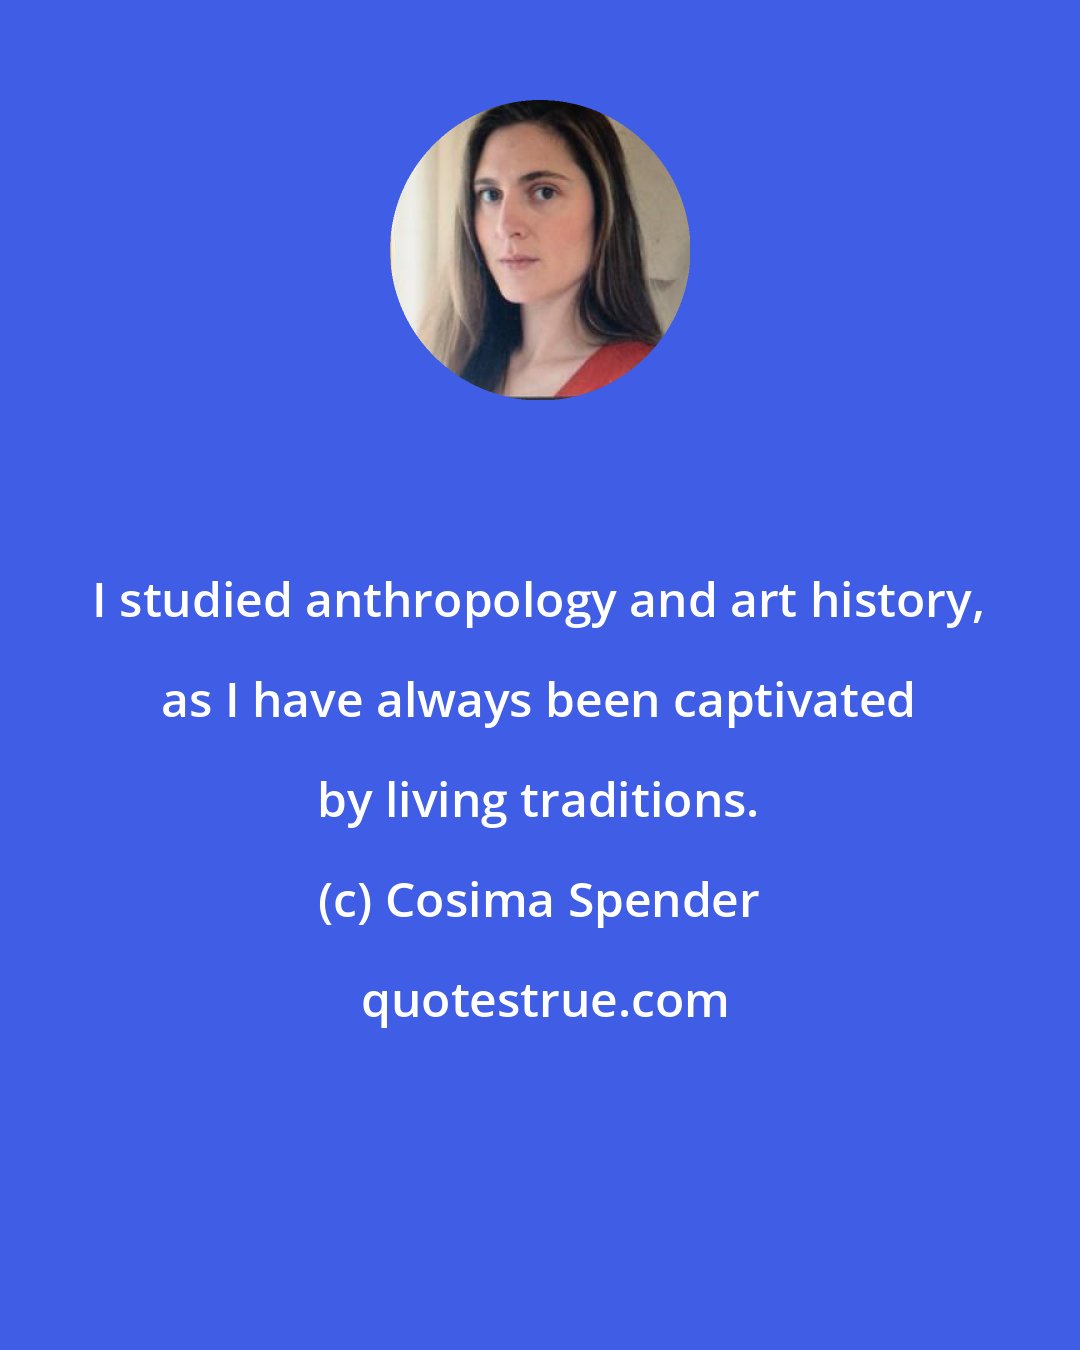 Cosima Spender: I studied anthropology and art history, as I have always been captivated by living traditions.